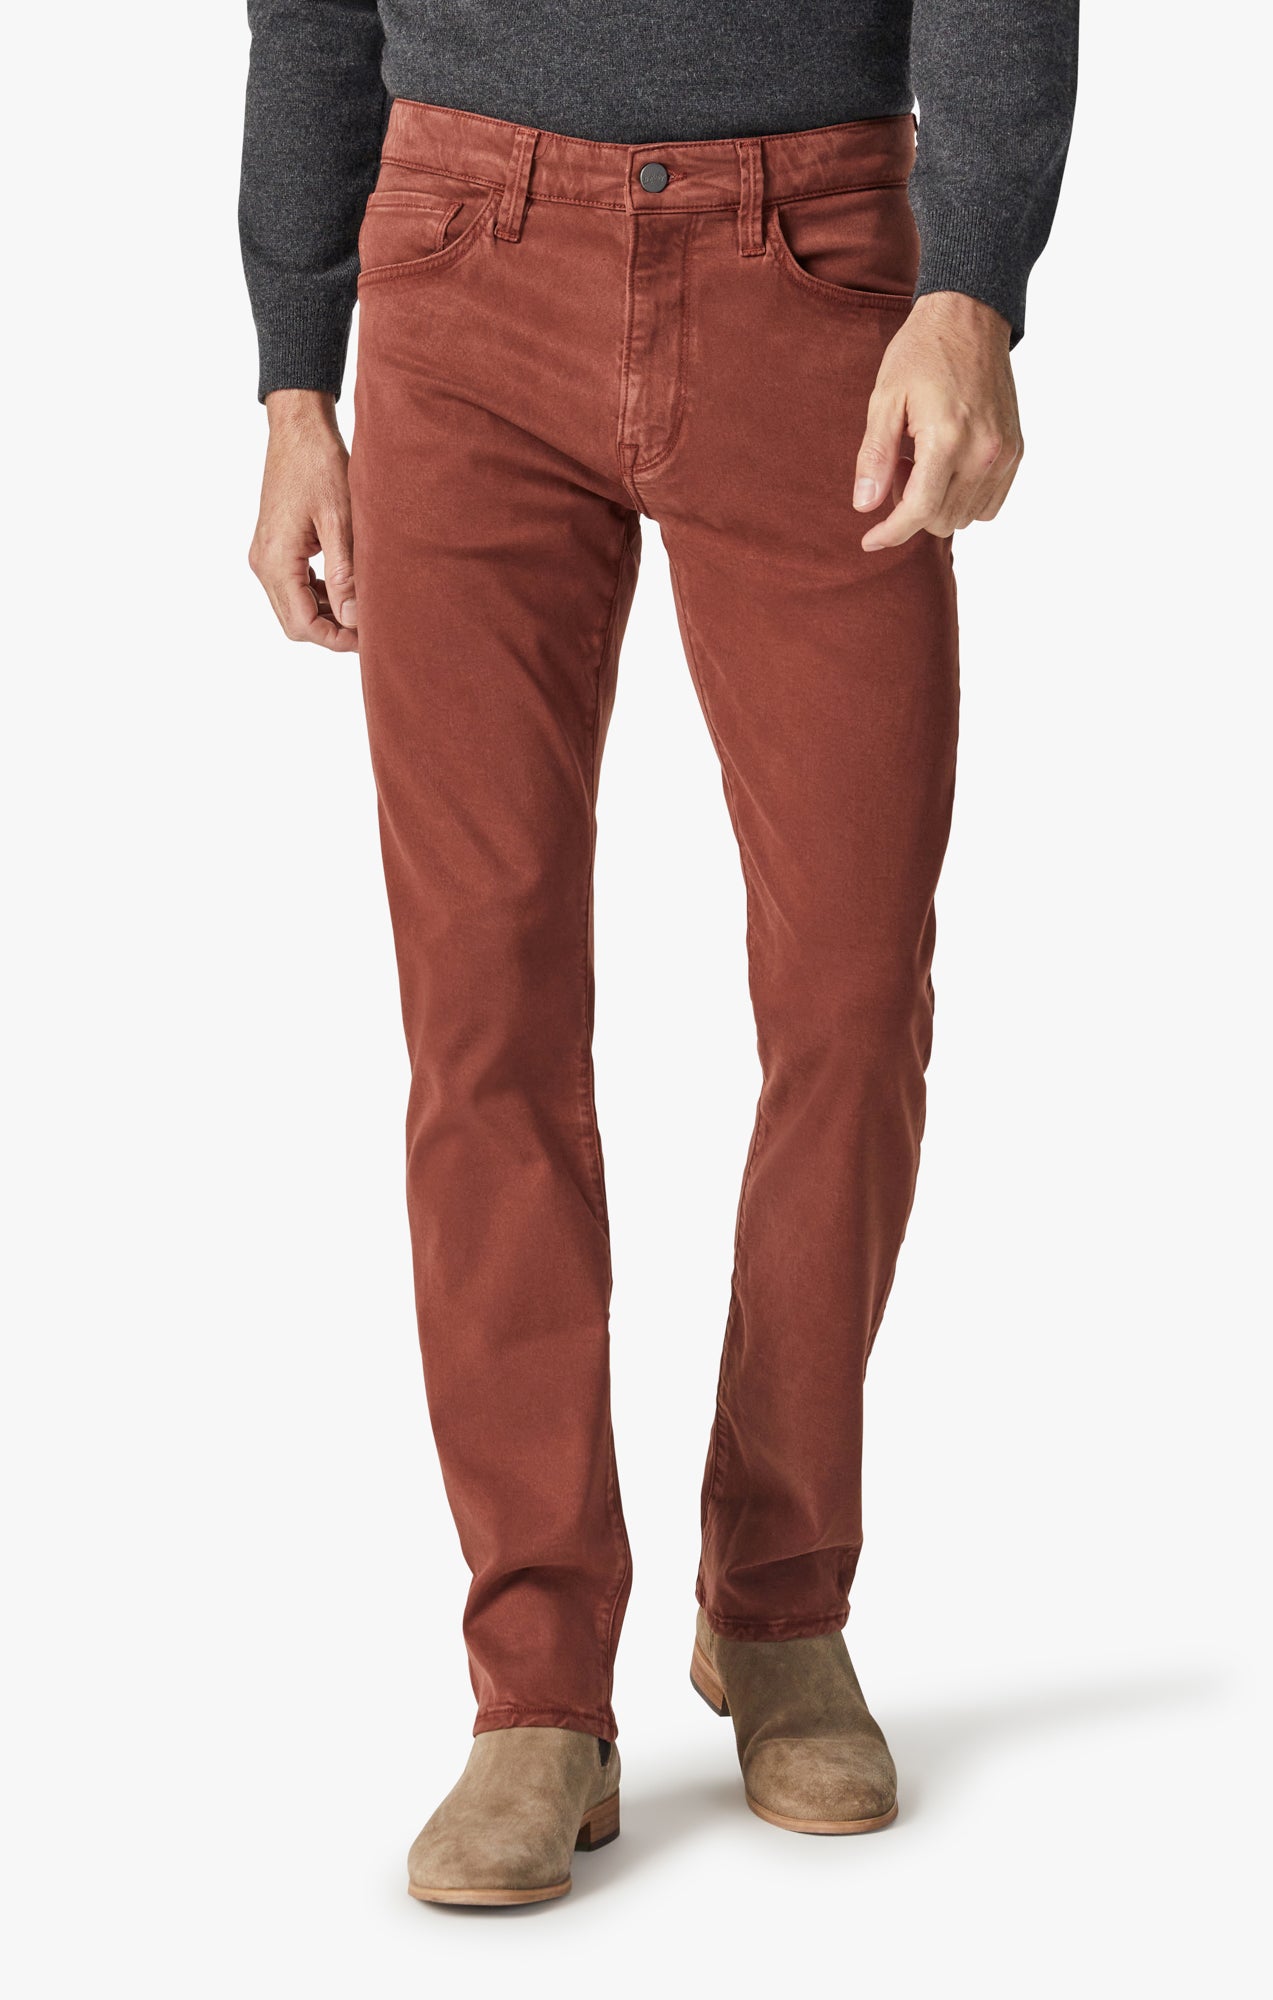 Cool Tapered Leg Pants in Cinnamon Brushed Twill